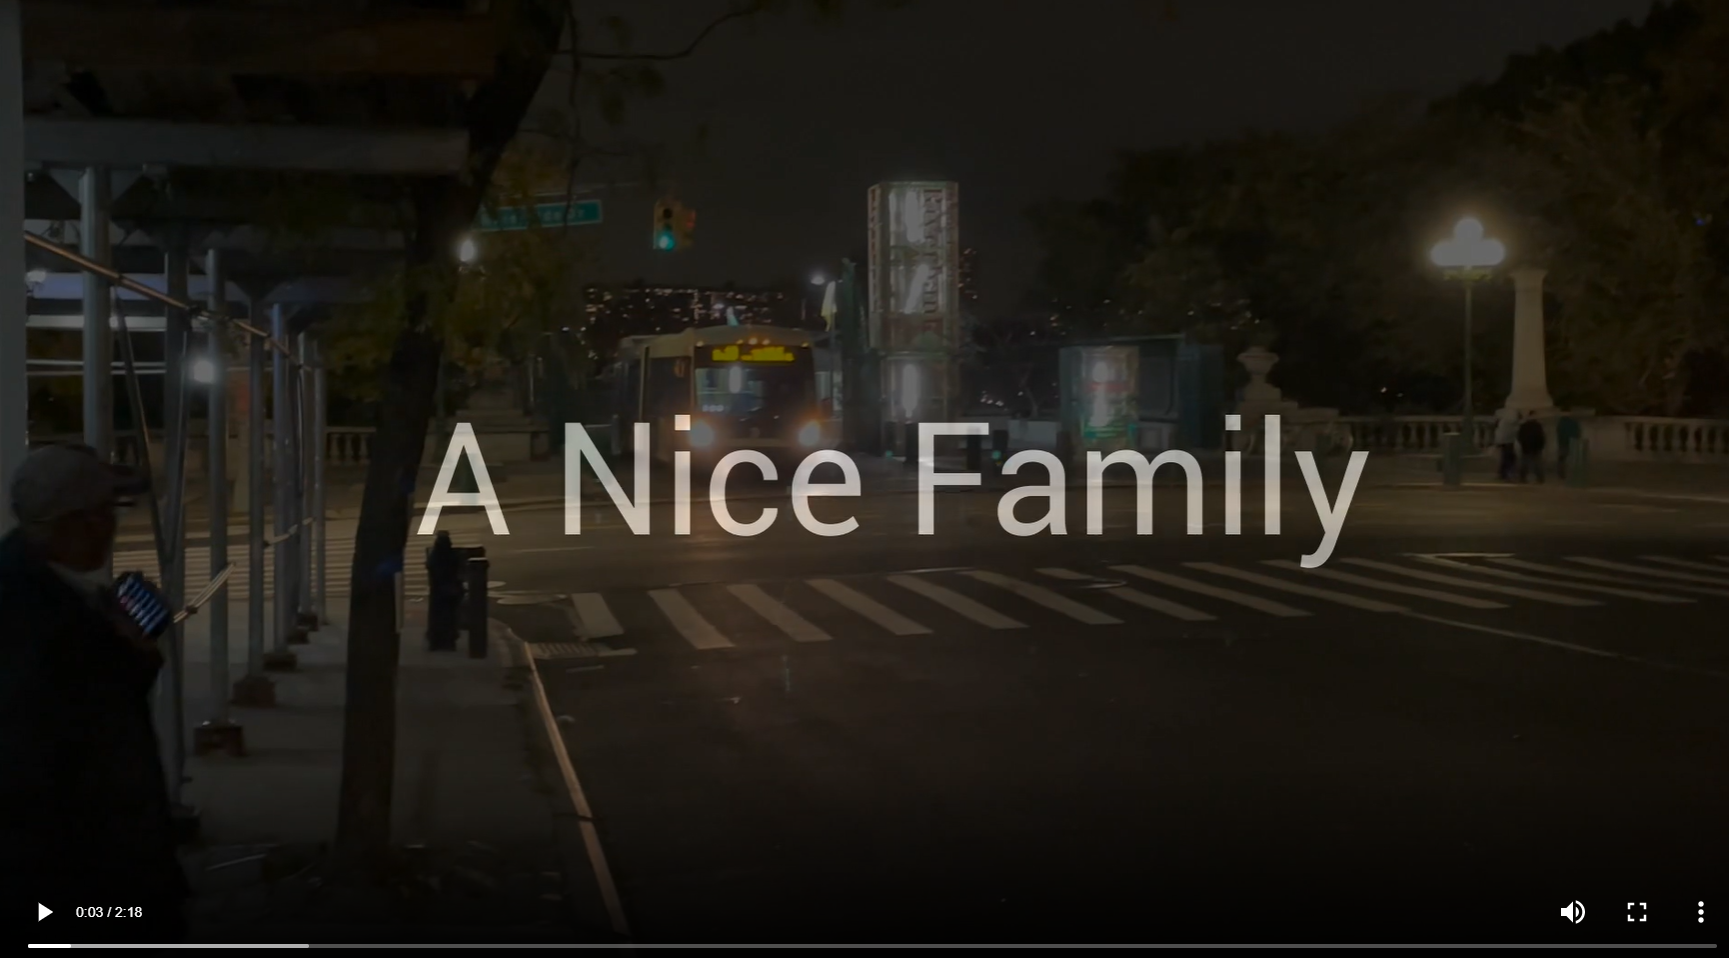 Video titled "A Nice Family" over a background of a city street. 